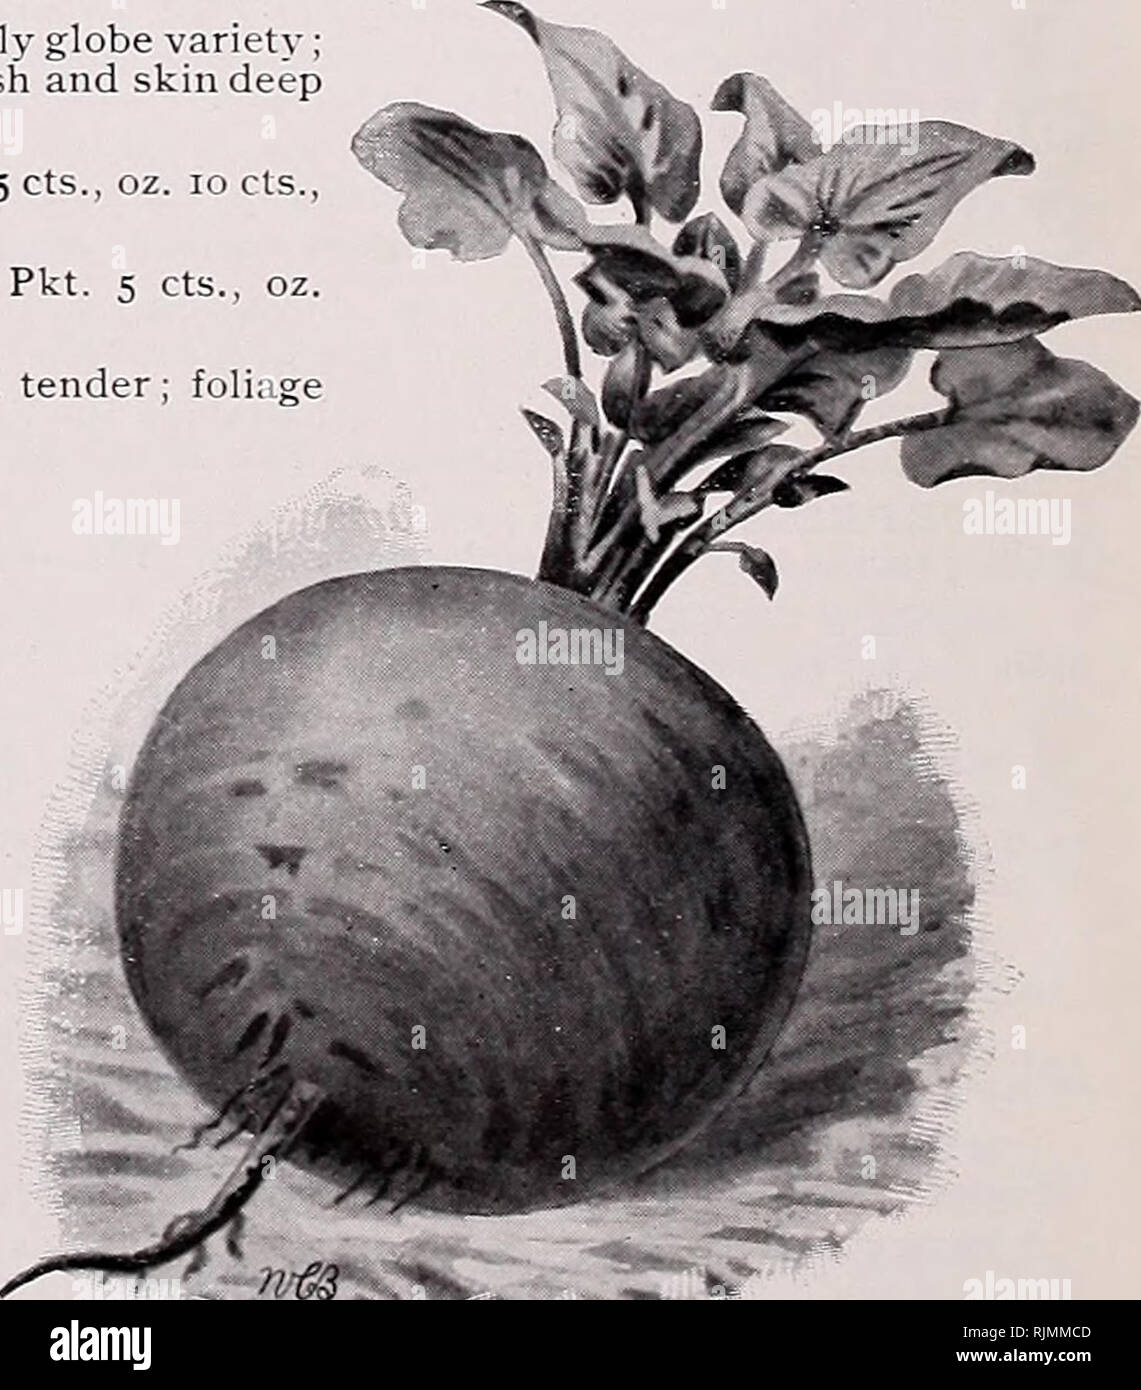 . Beckert's garden, flower &amp; lawn seeds. Commercial catalogs Seeds; Vegetables Seeds Catalogs; Bulbs (Plants) Seeds Catalogs; Fruit Seeds Catalogs; Flowers Seeds Catalogs; Garden tools Catalogs. Duke of Albany Peas Round, smooth and uniform in shape d and tender; foliage red ; of best quality. Pkt. 5 cts , oz. 10 cts ECLIPSE. Roots globe-shaped, deep red, with sweet, fine-grained flesh Klb. 20 cts., lb. 60 cts. EDMAND'S BLOOD TURNIP loots., 54lb. 20 cts , lb 60 cts. DETROIT BLOOD TURNIP. Roots globular or ovoid ; flesh dark small. Pkt. 5 cts., oz. 10 cts , &quot;ilb. 20 cts., lb. 60 cts. D Stock Photo